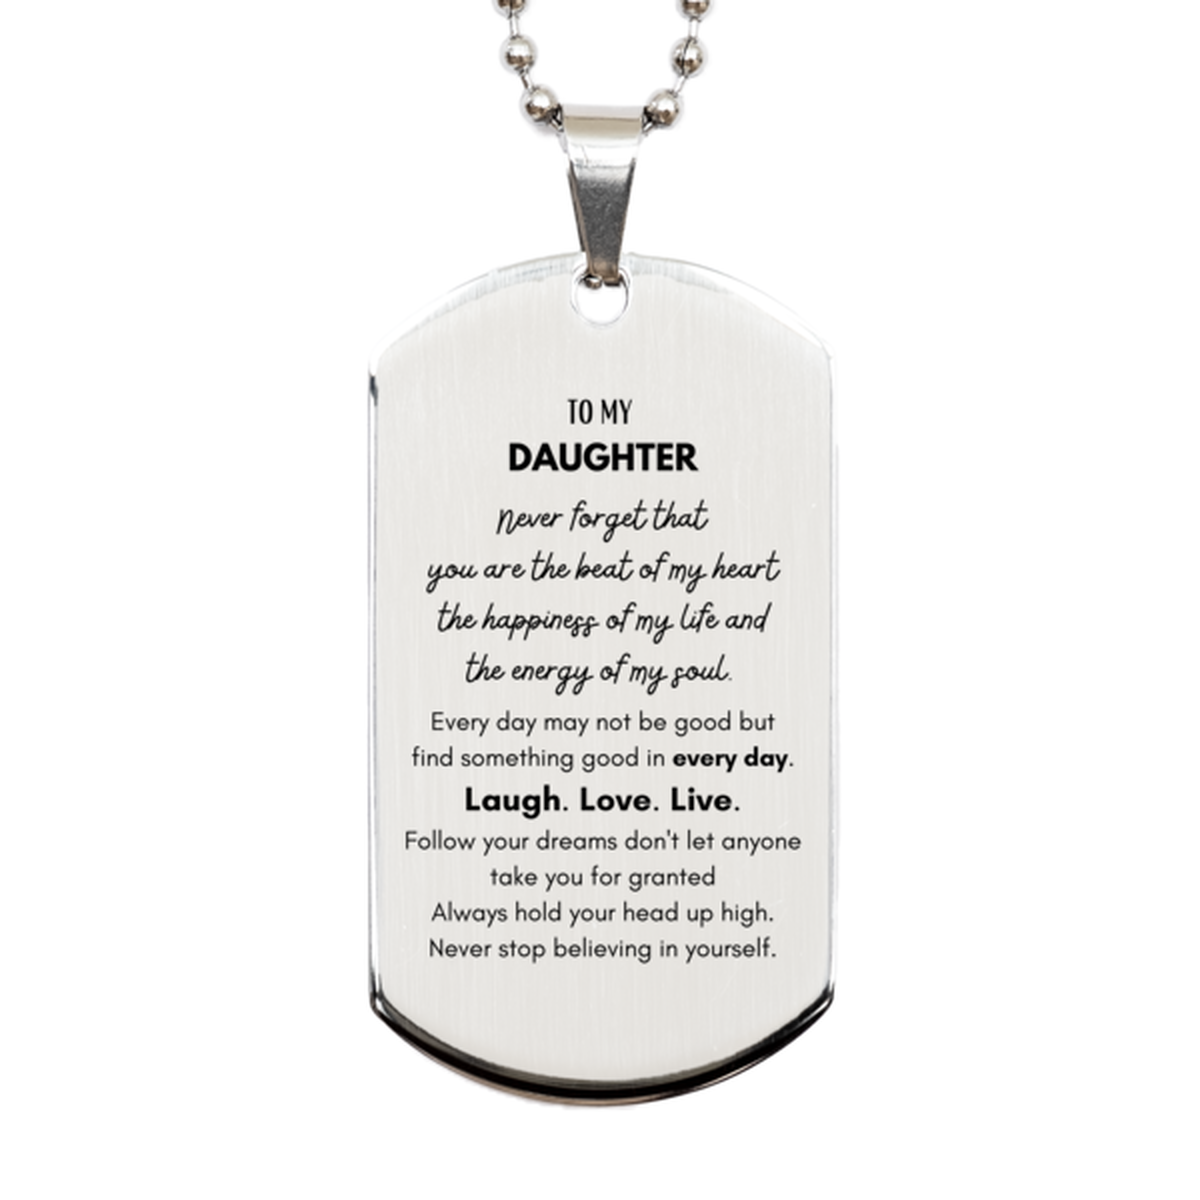 To My Daughter Dogtag Gifts, Christmas Daughter Silver Dog Tag Present, Birthday Unique Motivational For Daughter, To My Daughter Never forget that you are the beat of my heart the happiness of my life and the energy of my soul